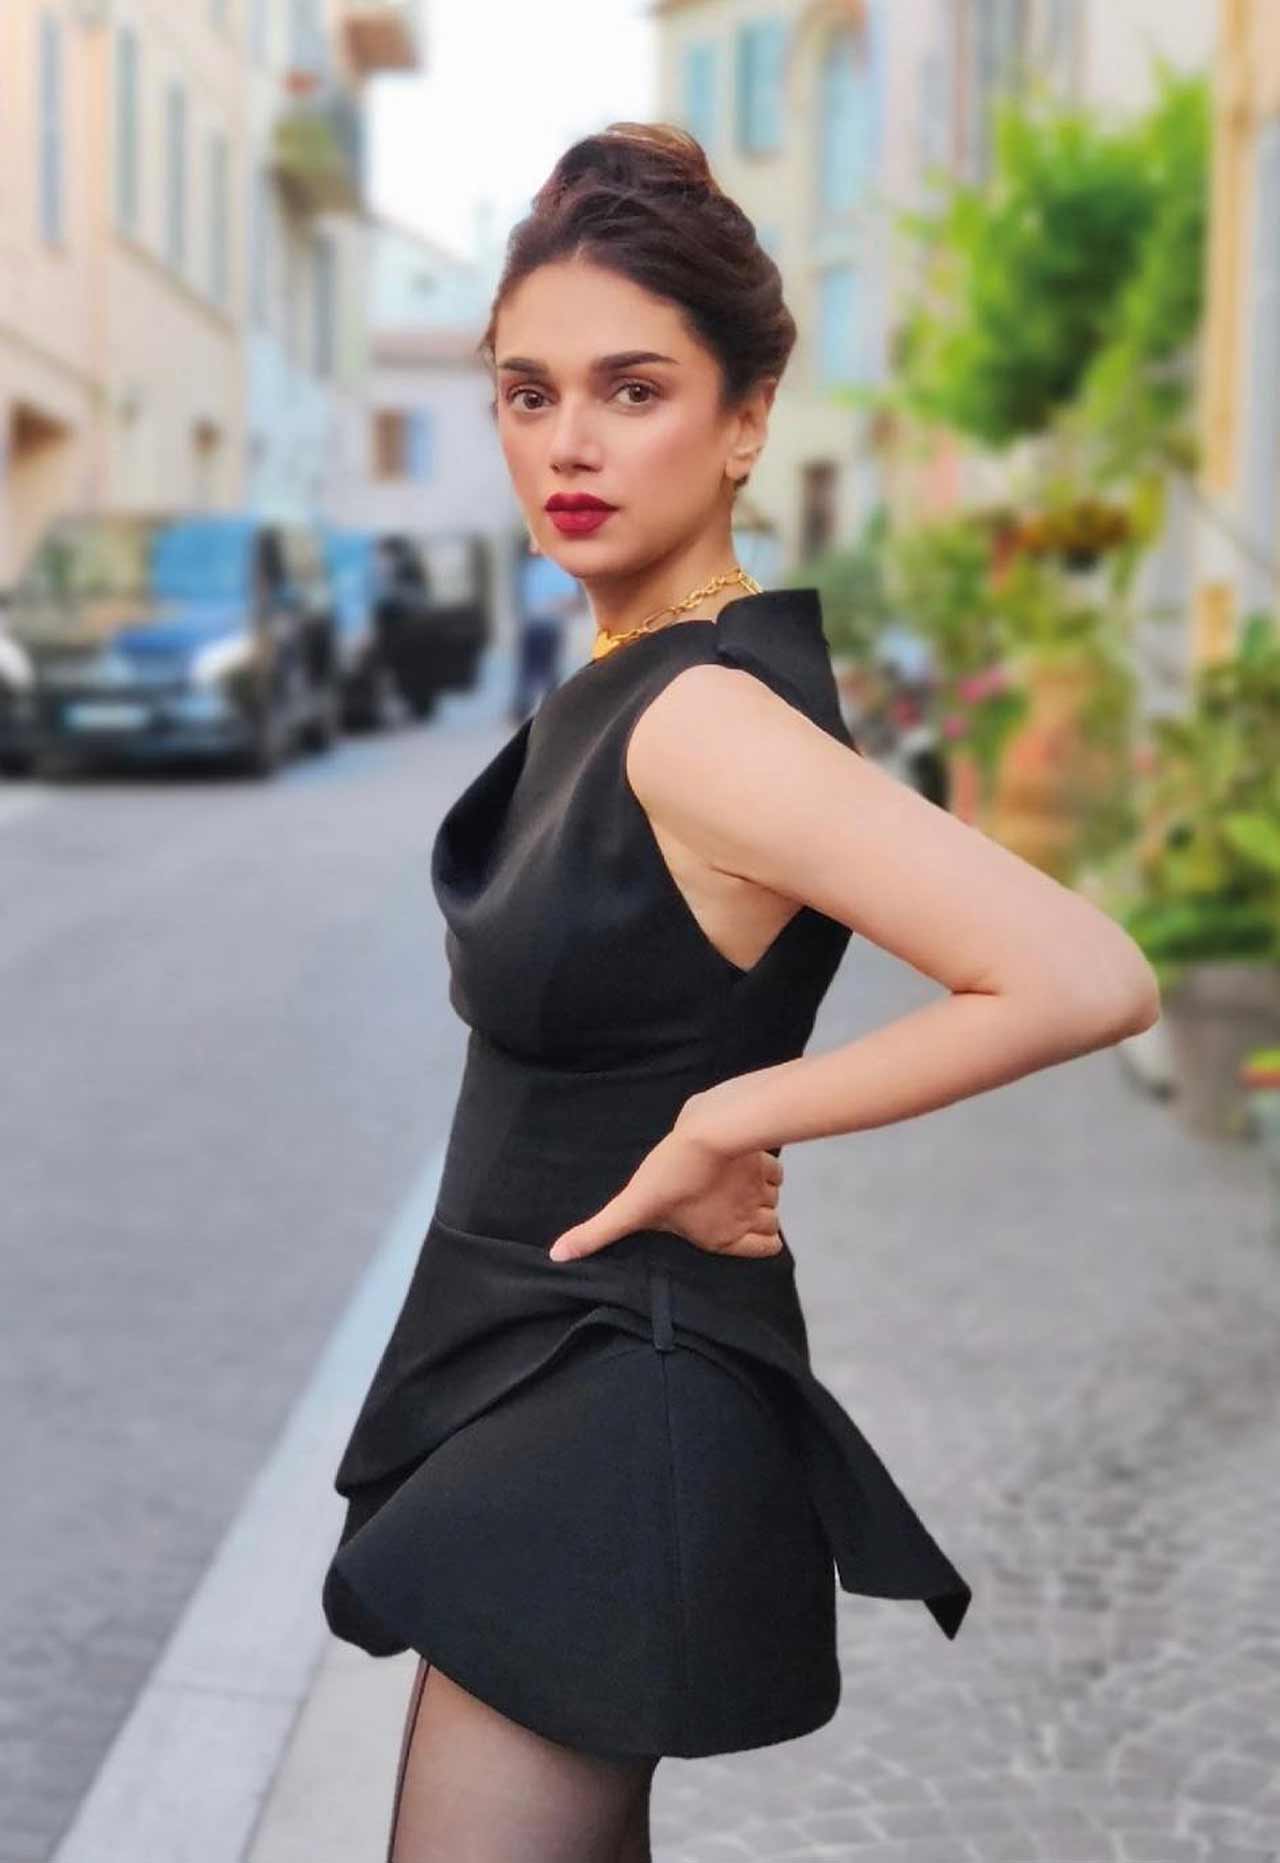 Aditi Rao Hydari looked chic in a little black dress, paired with a high bun and red lipstick.